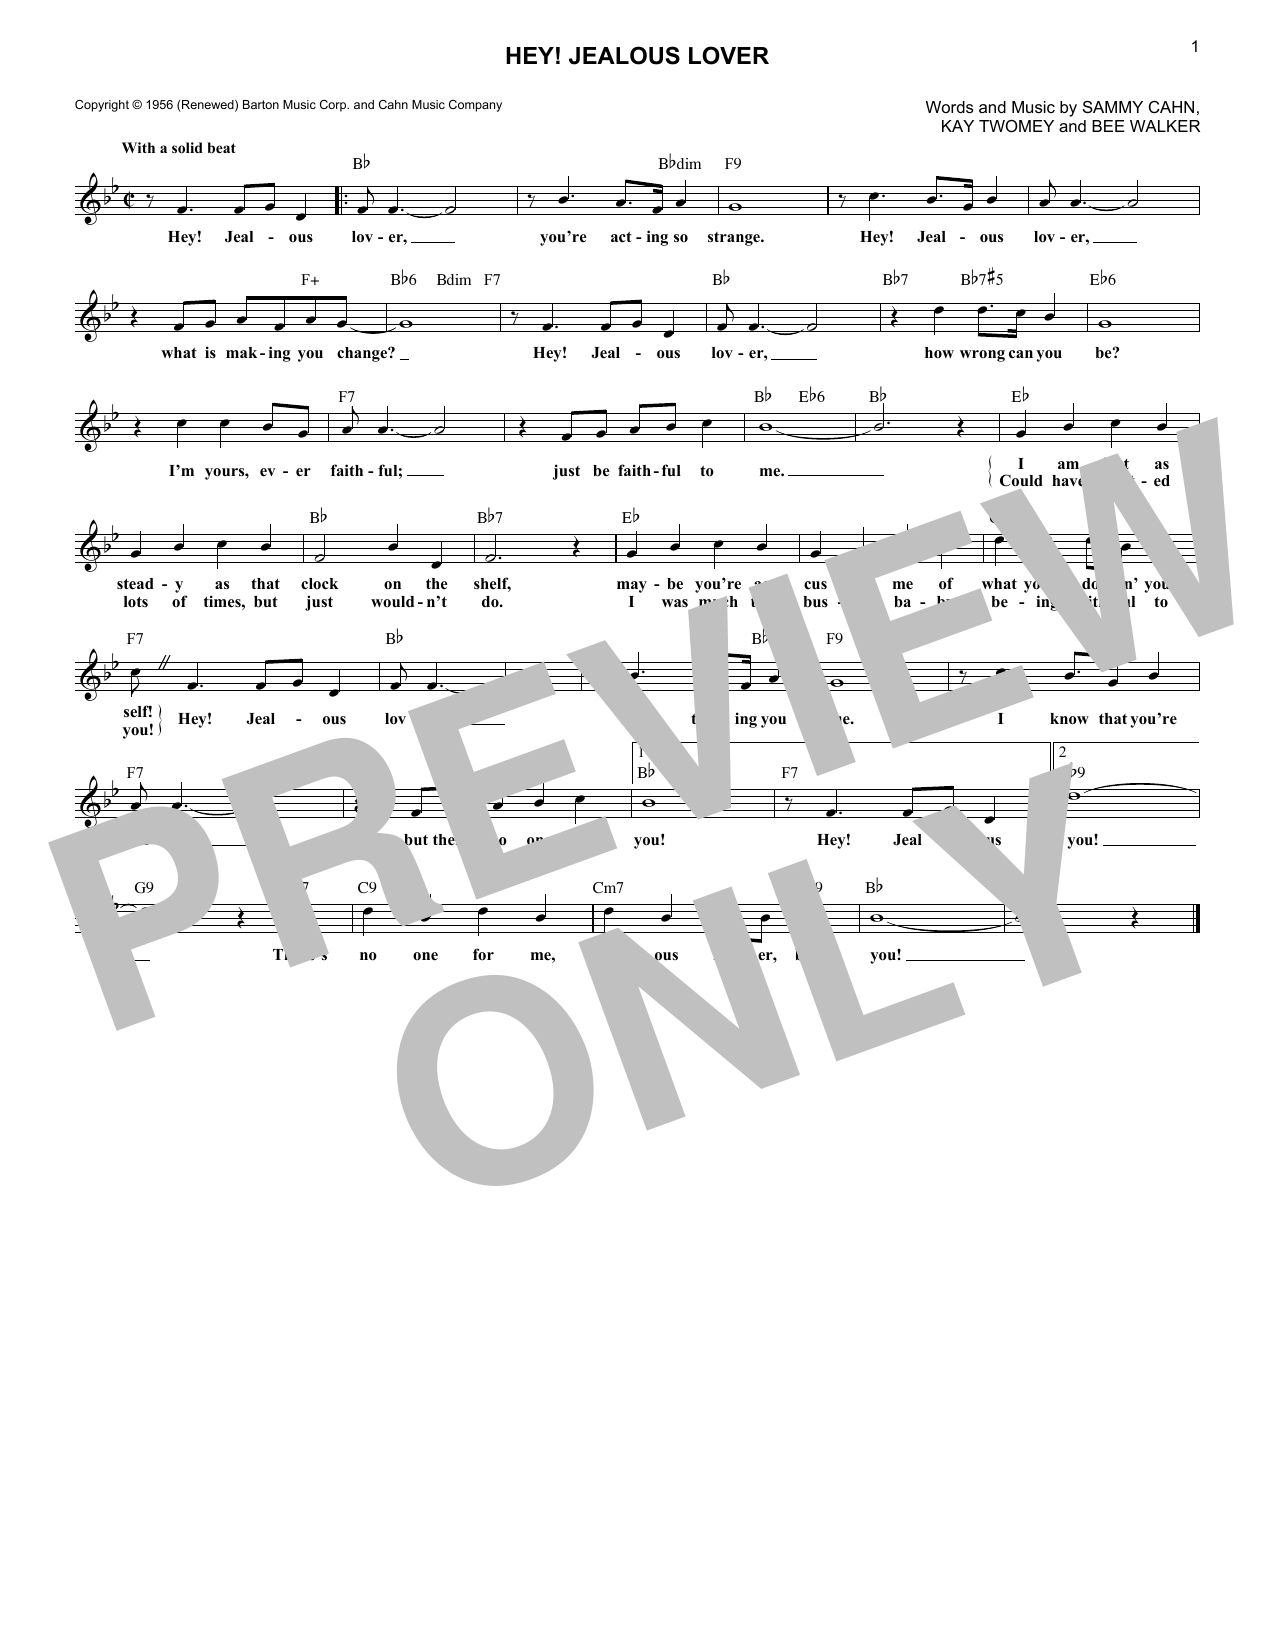 Sammy Cahn Hey! Jealous Lover sheet music notes and chords. Download Printable PDF.